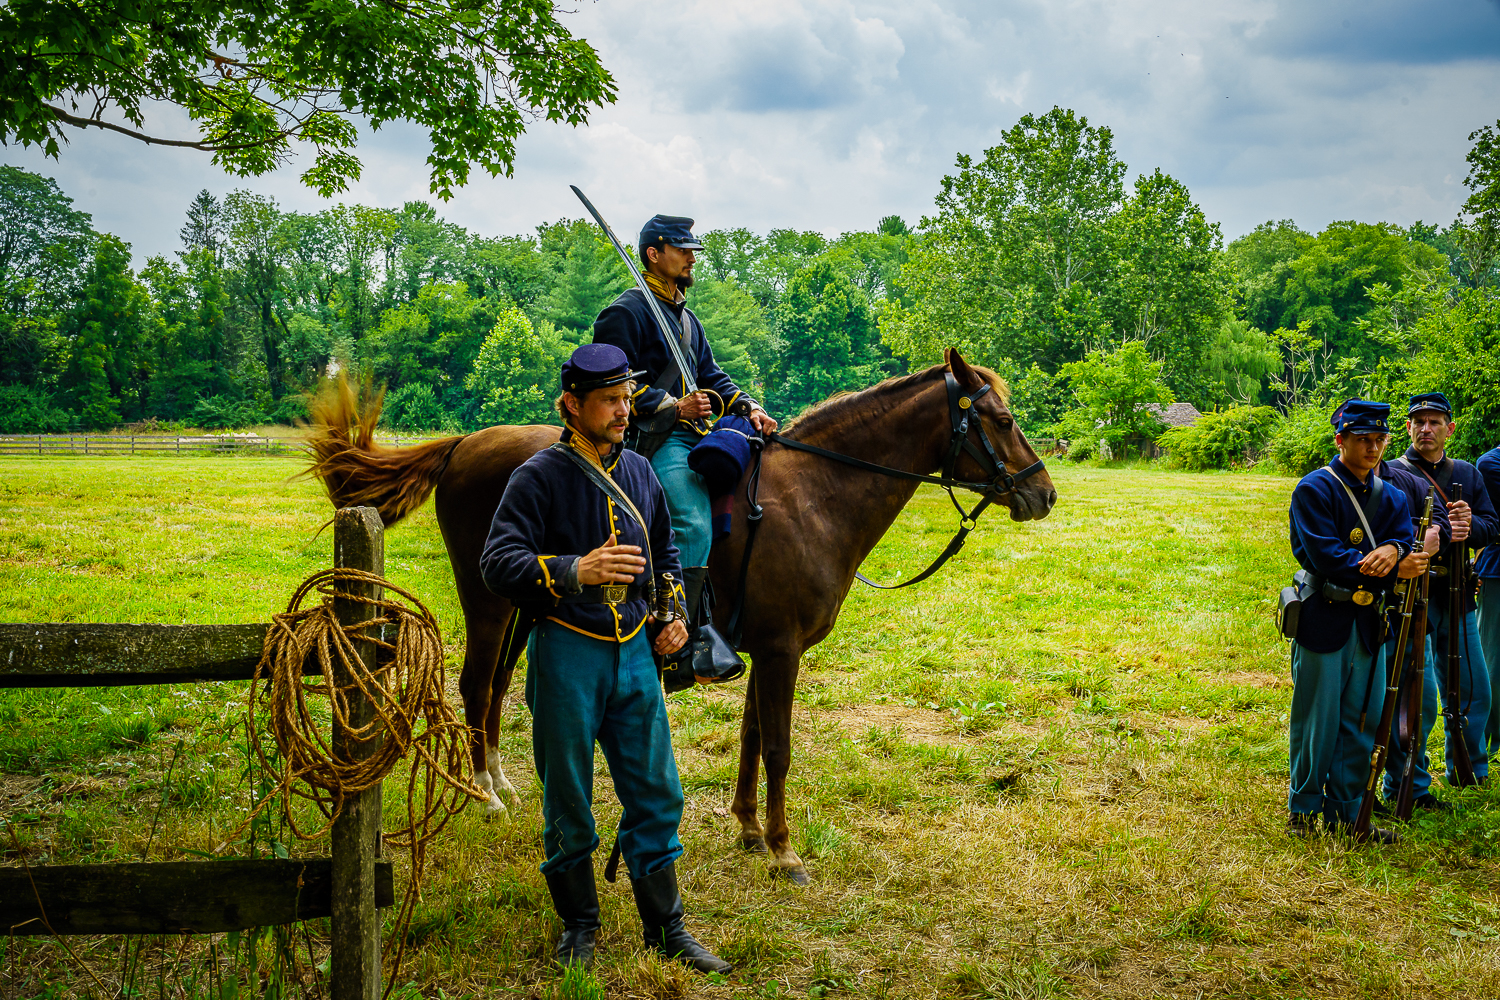 Union Cavalry Soldiers Photo by George Sheldon